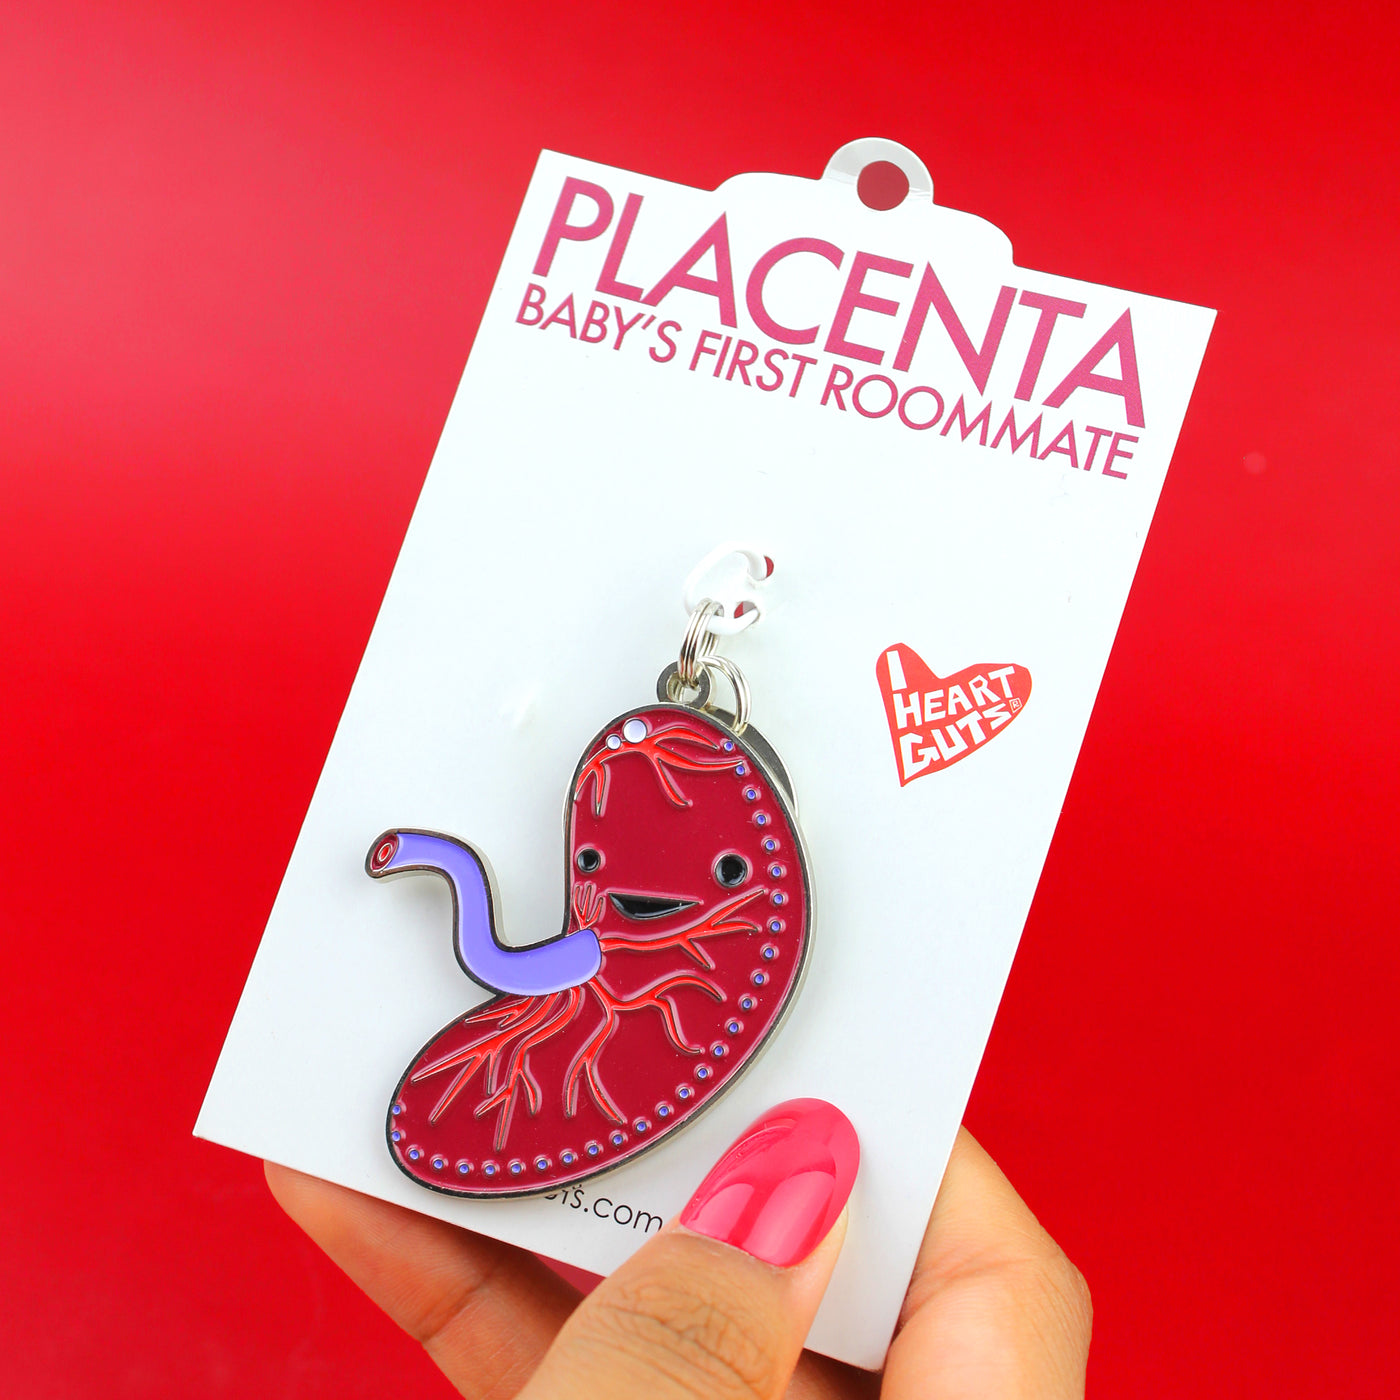 Placenta Keychain - Baby's First Roommate - I Heart Guts